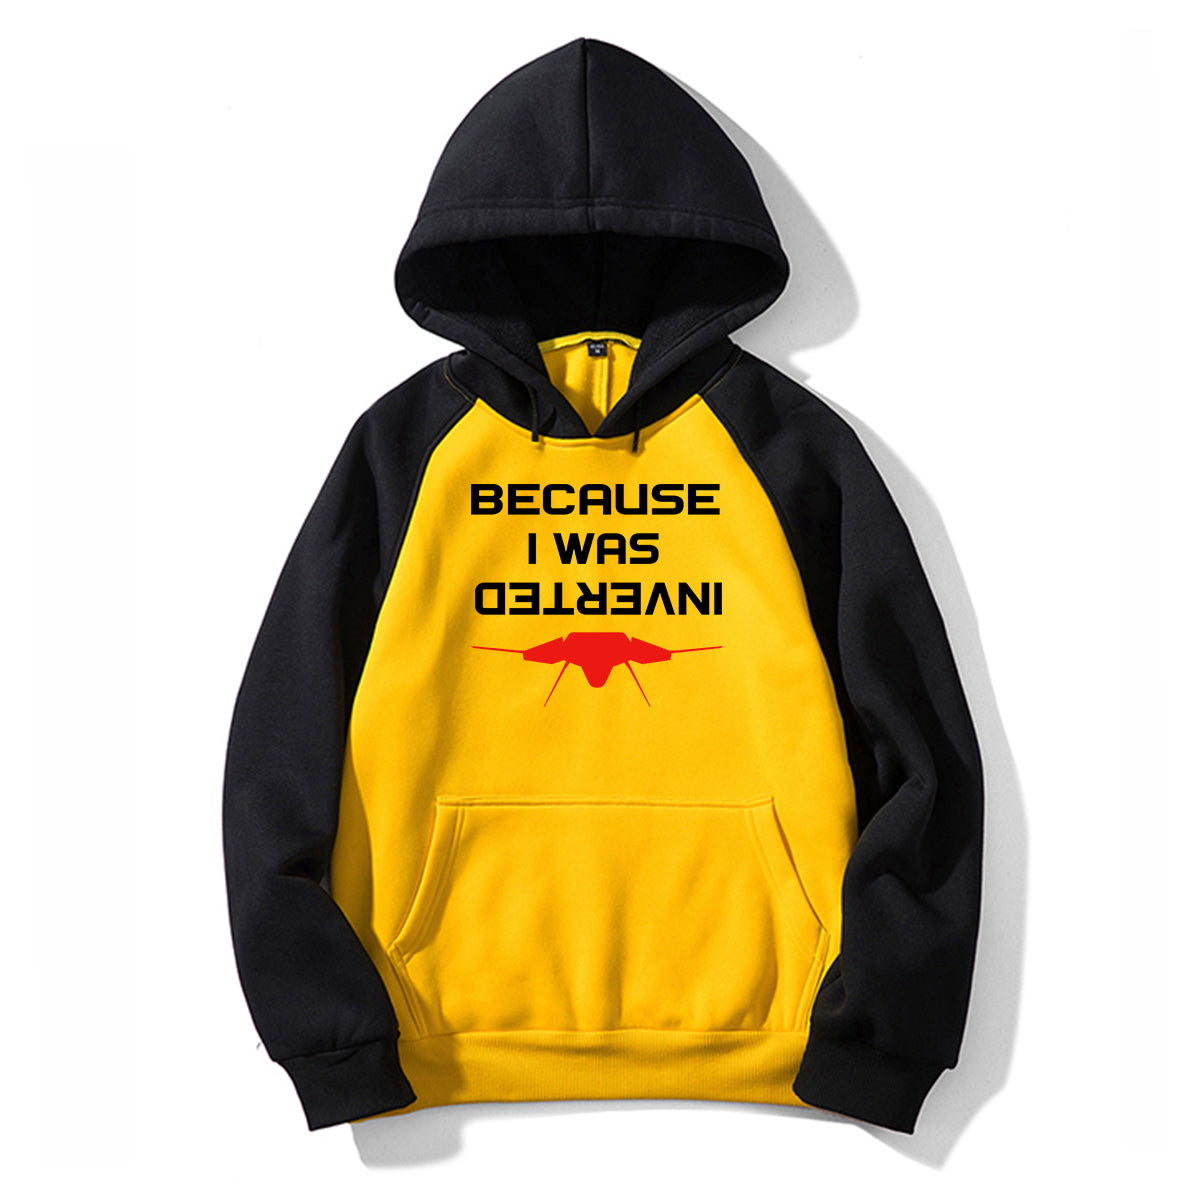 Because I was Inverted Designed Colourful Hoodies